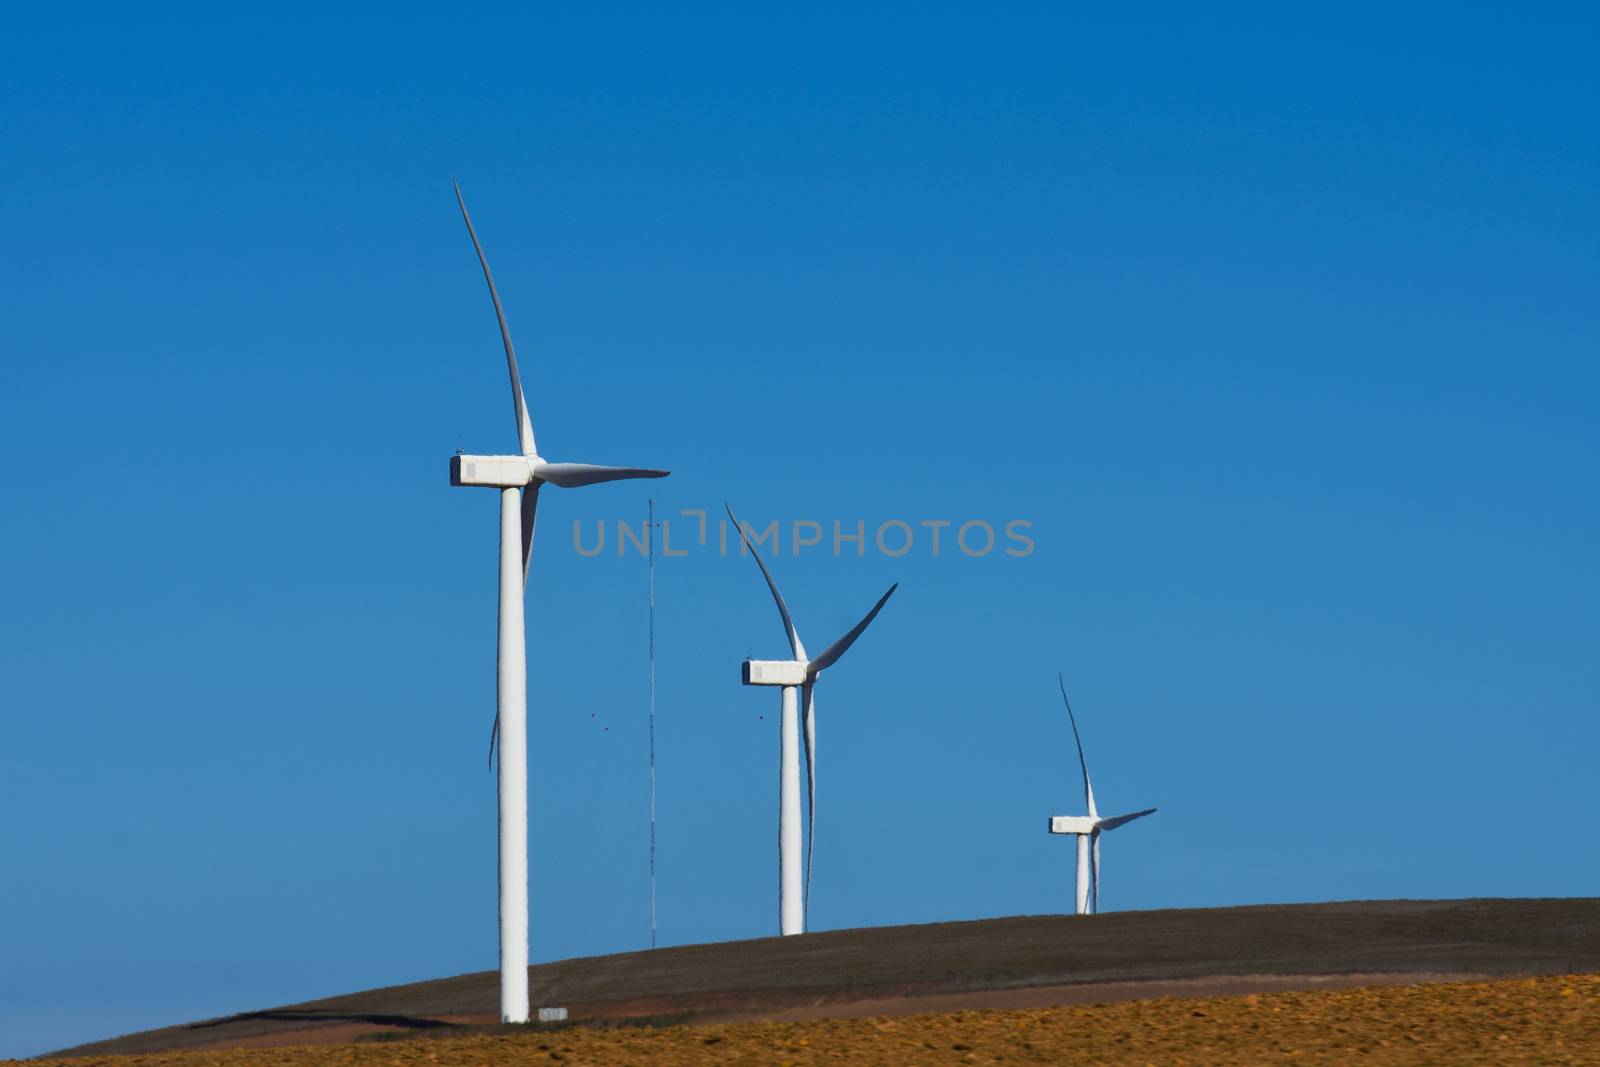 Towering wind power turbines on a wind farm hilltop, Western Cape, South Africa